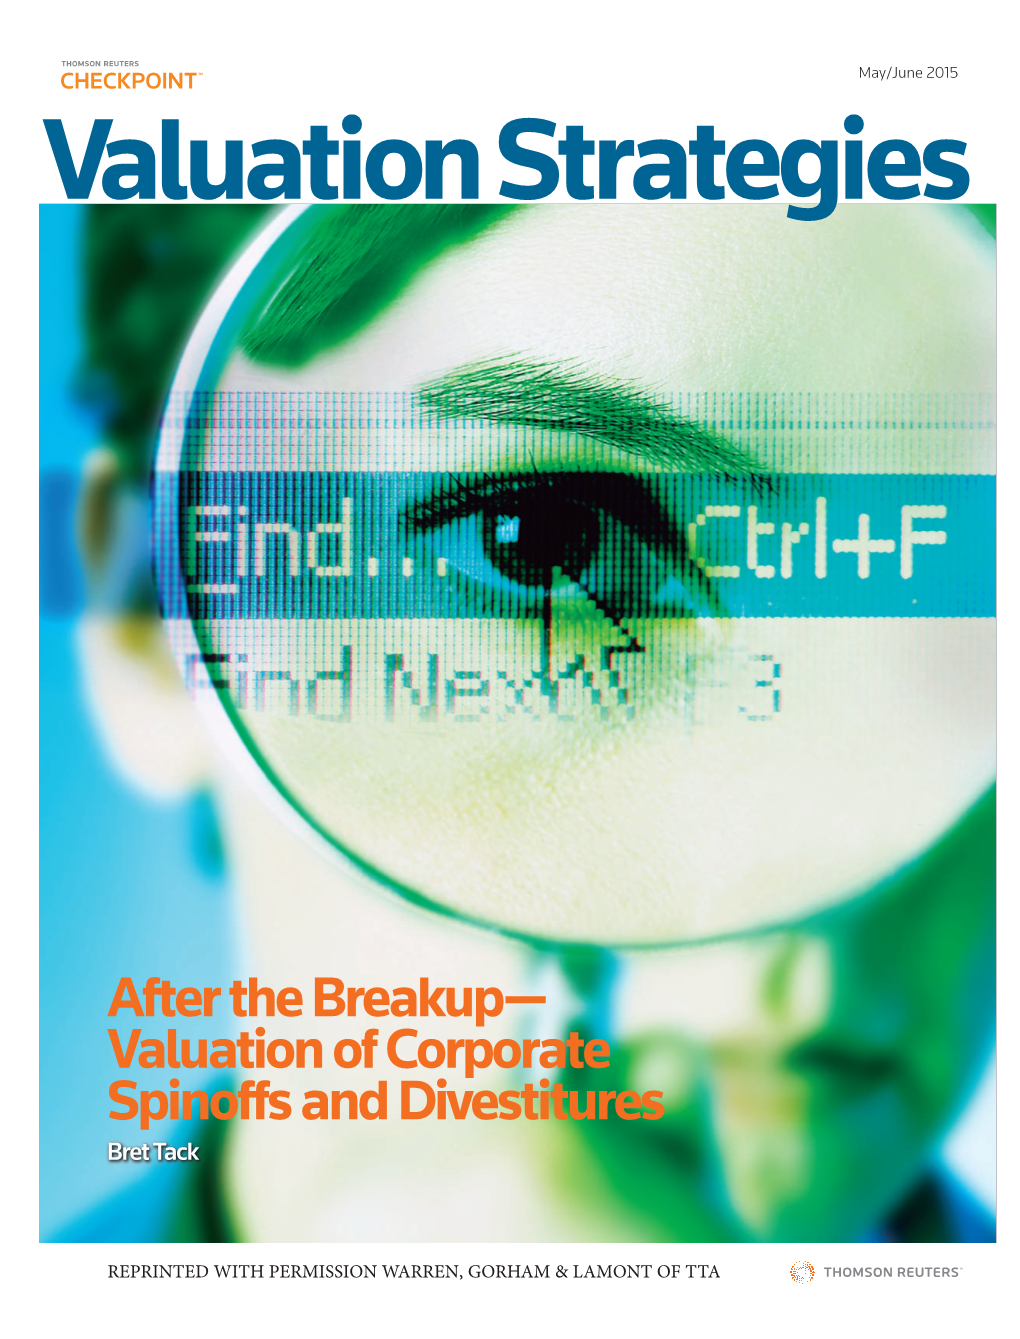 After the Breakup— Valuation of Corporate Spinoffs and Divestitures Bret Tack VLRE-15-05-04-TACK Layout 1 4/20/15 3:17 PM Page 22